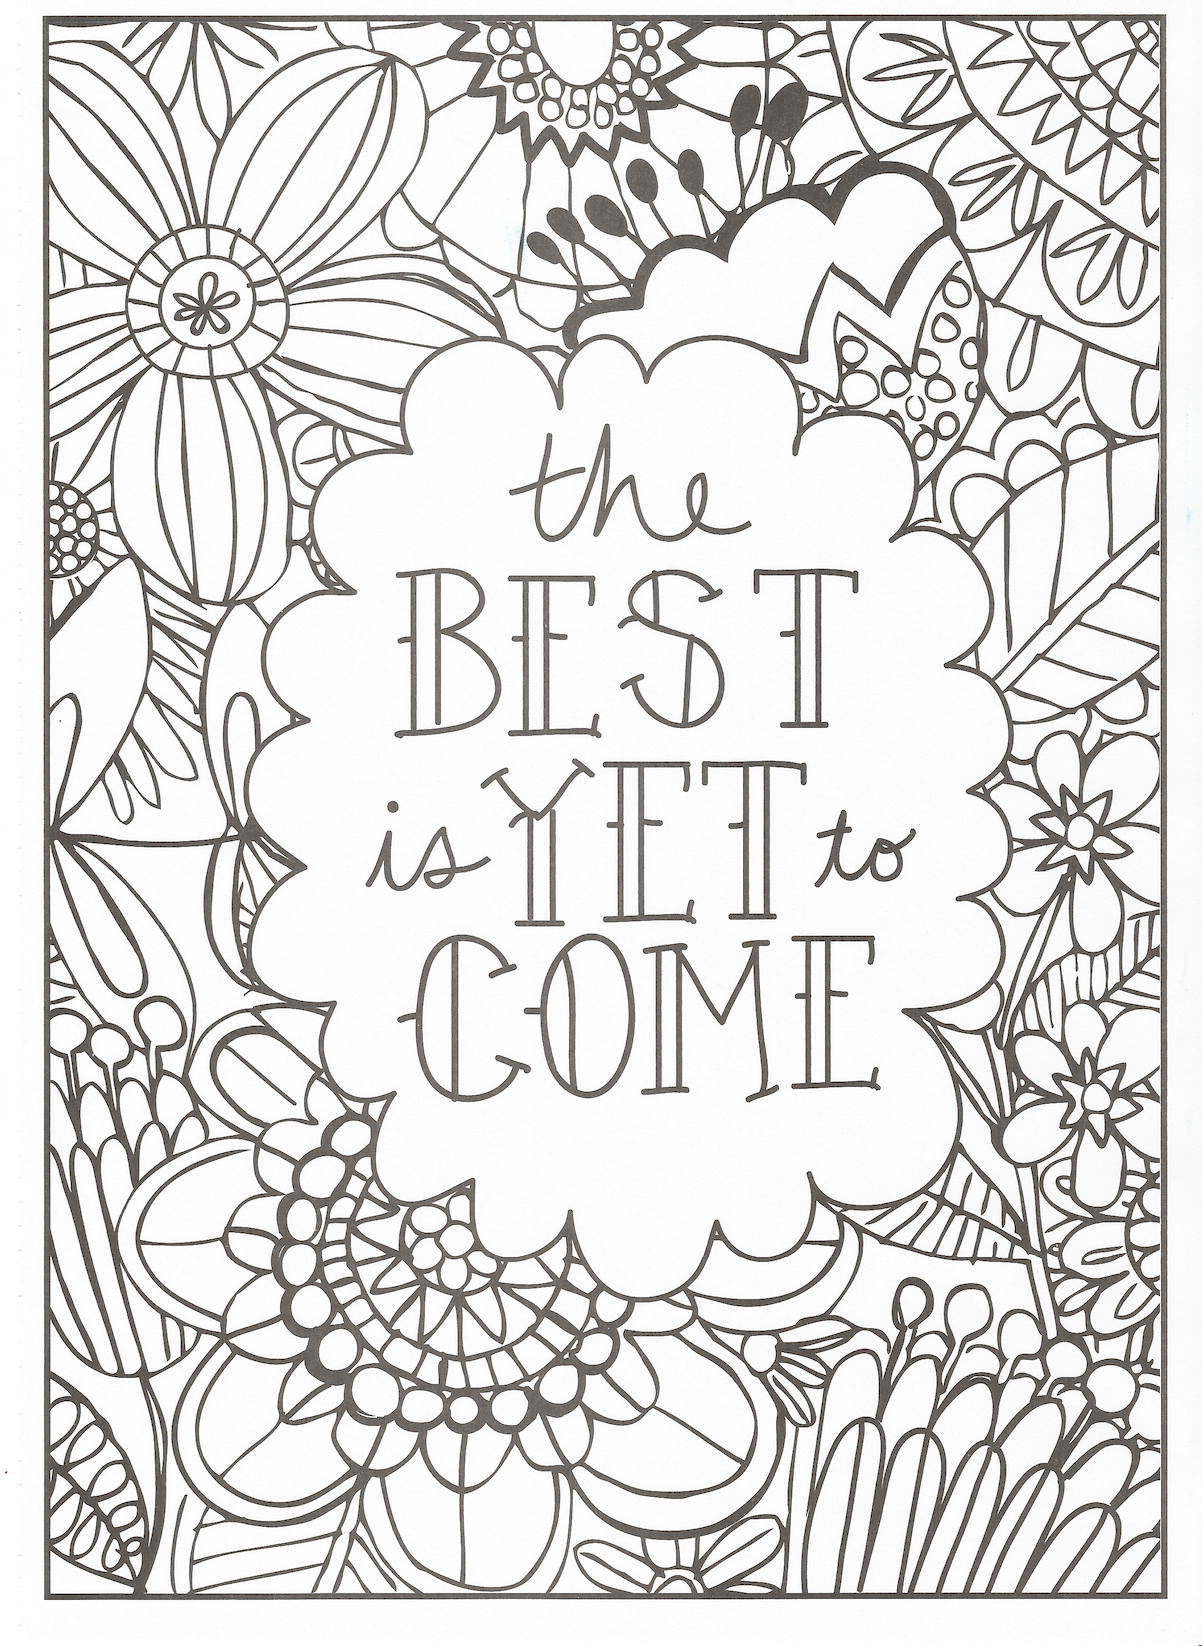 Timeless Creations Creative Quotes Coloring Page The | Quote coloring pages,  Coloring pages, Free coloring pages